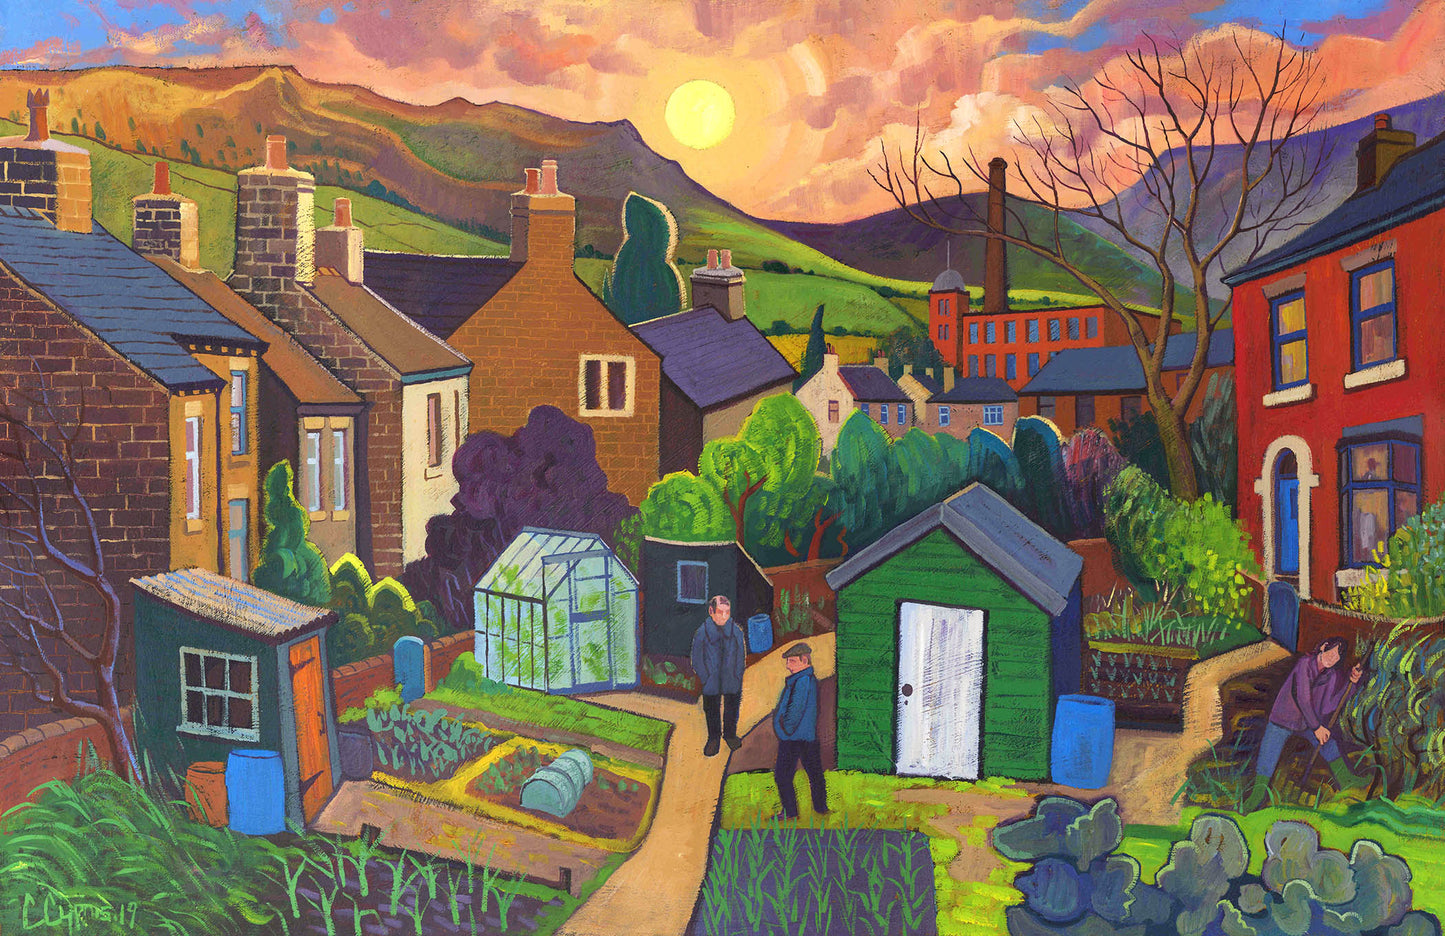 Limited Edition Gicleé print by artist chris cyprus  Reproduced from the original oil painting completed in 2019. An early morning meeting on the allotment, to swap growing tips and discuss who has the biggest carrots!   Actual size of artwork 54cm x 35cm      Signed and embossed     Unique certificate of authentication     Limited run of 50     Printed on 300gsm archival quality paper using lightfast inks     Tube rolled perfect for worldwide shipping   